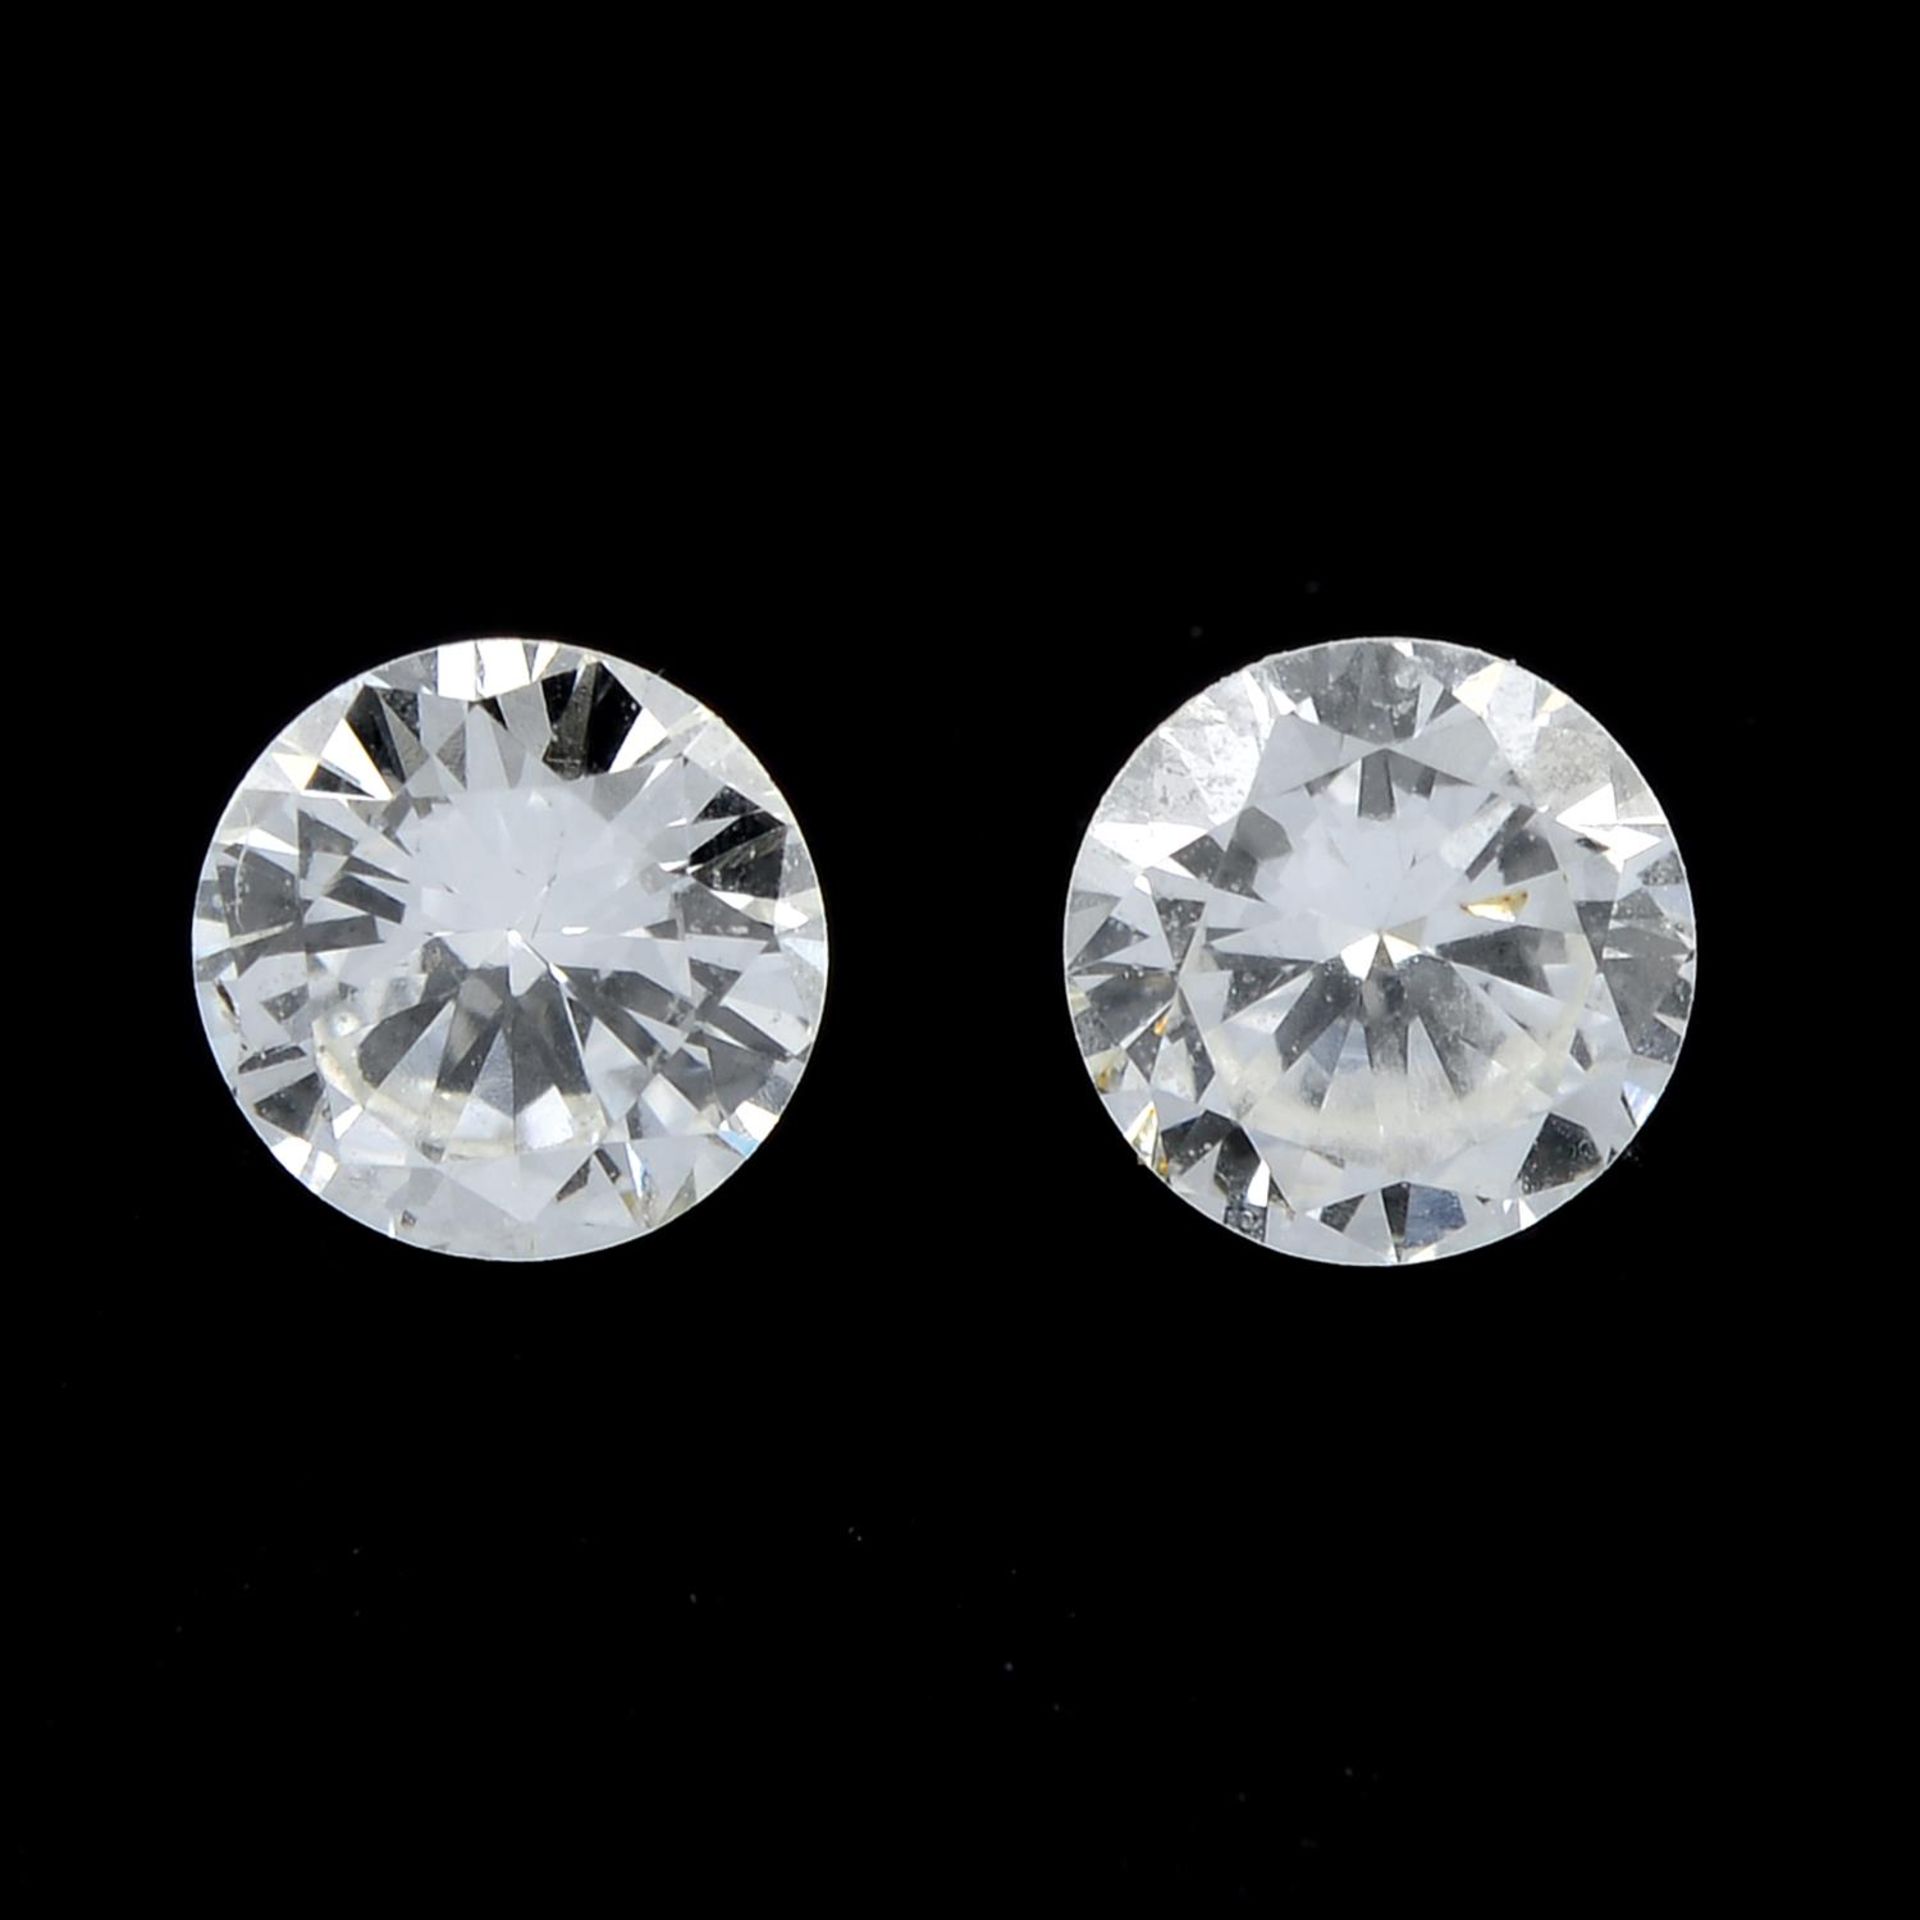 Two brilliant-cut diamonds, total weight 0.33ct.